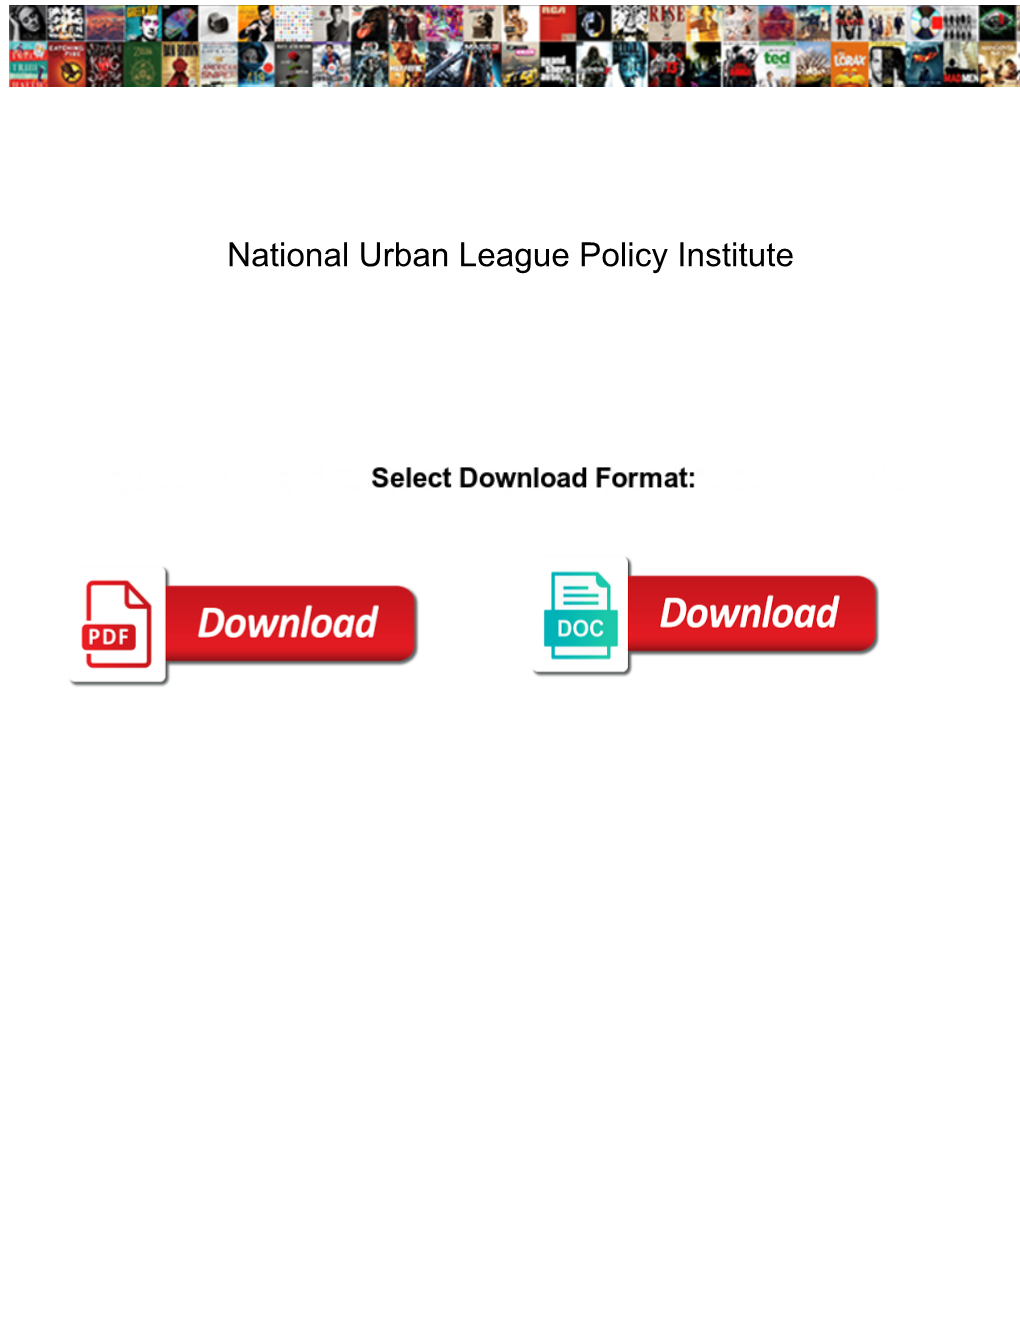 National Urban League Policy Institute